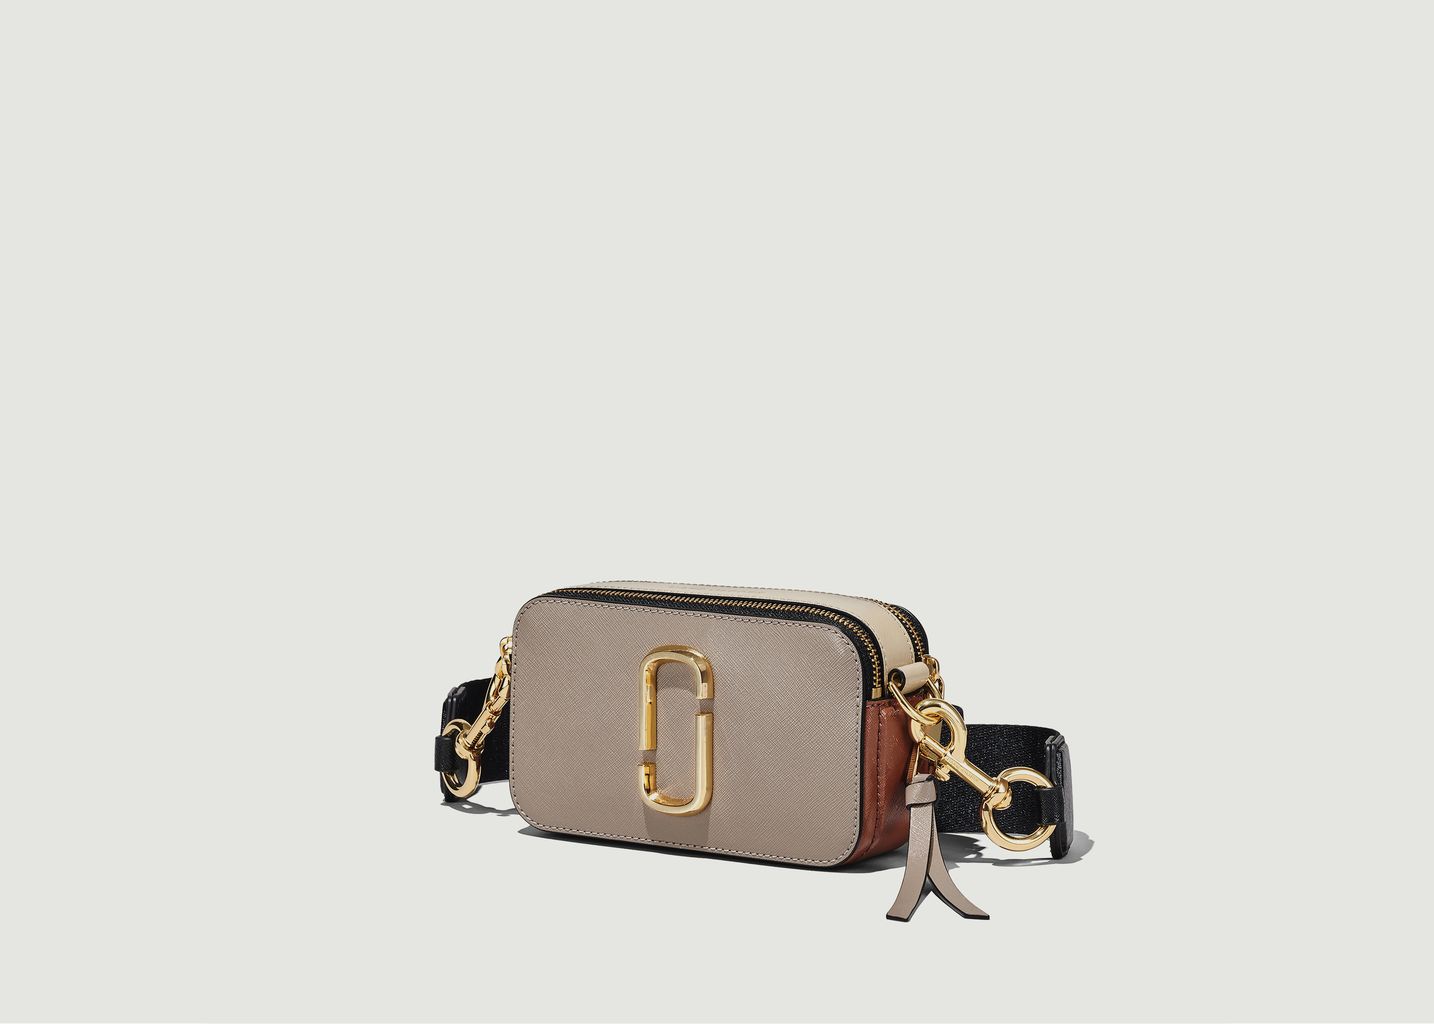 The Snapshot saffiano leather bag - Marc Jacobs